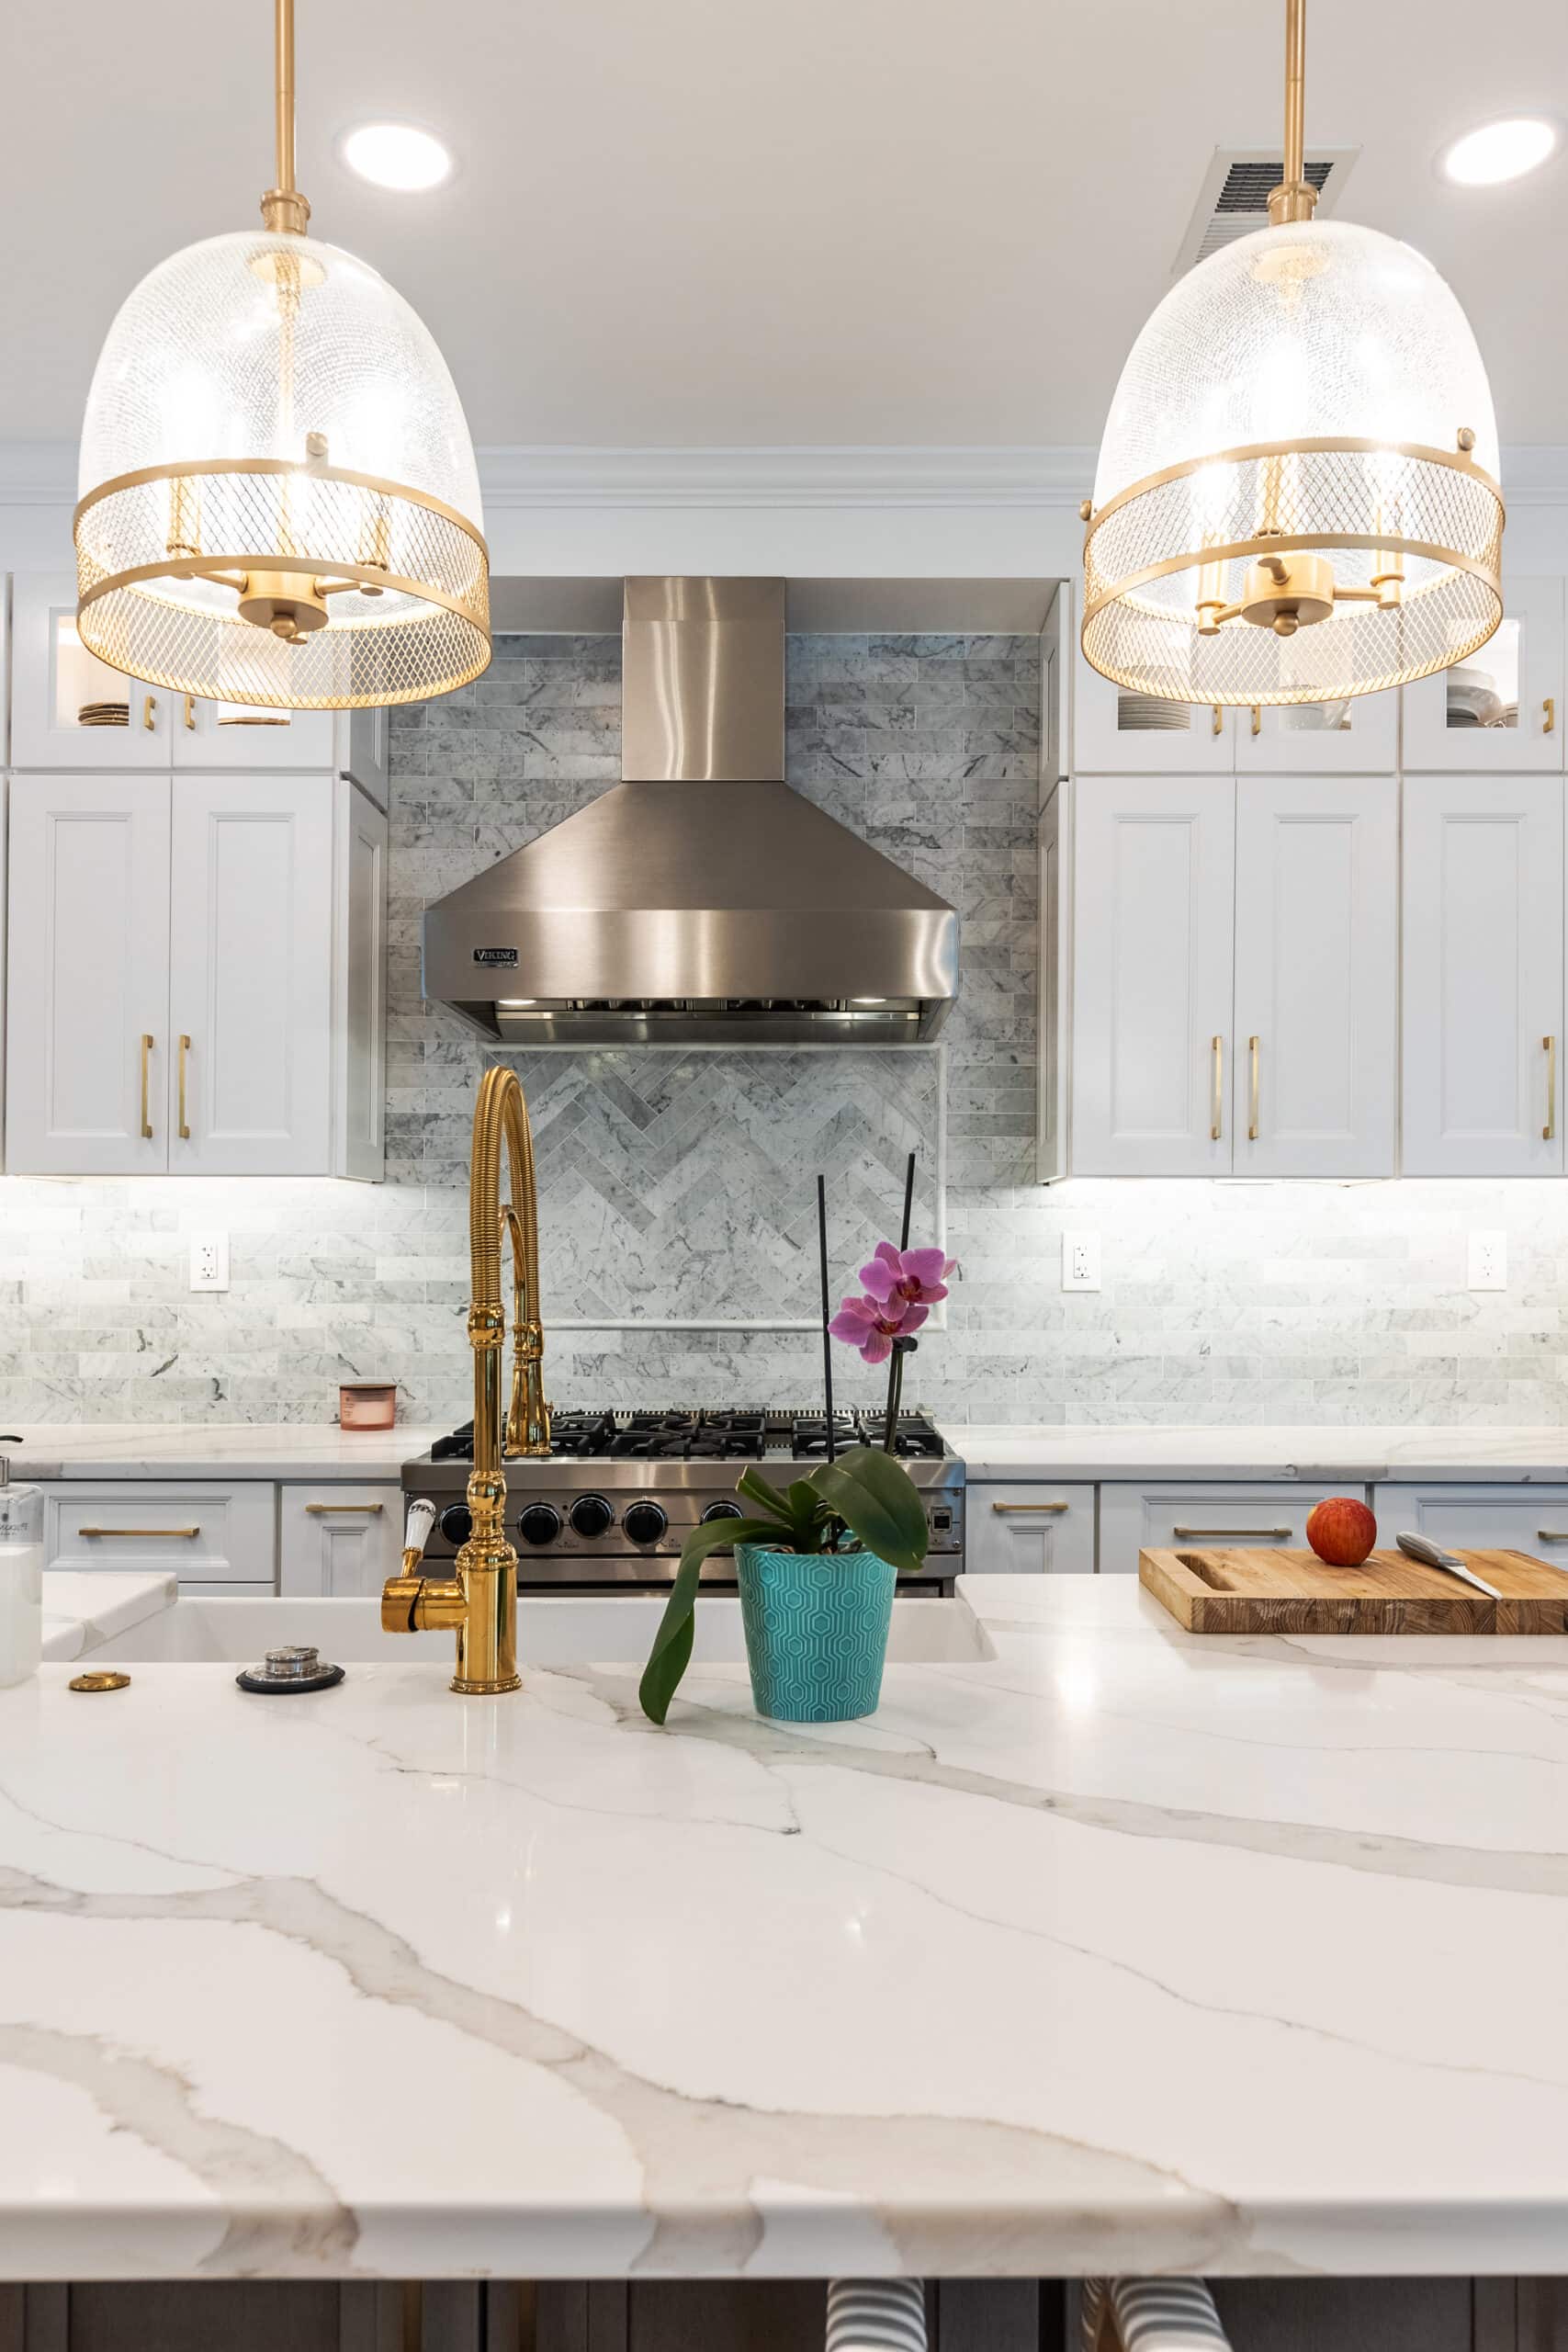 A kitchen with elegant marble counter tops and sleek white cabinet